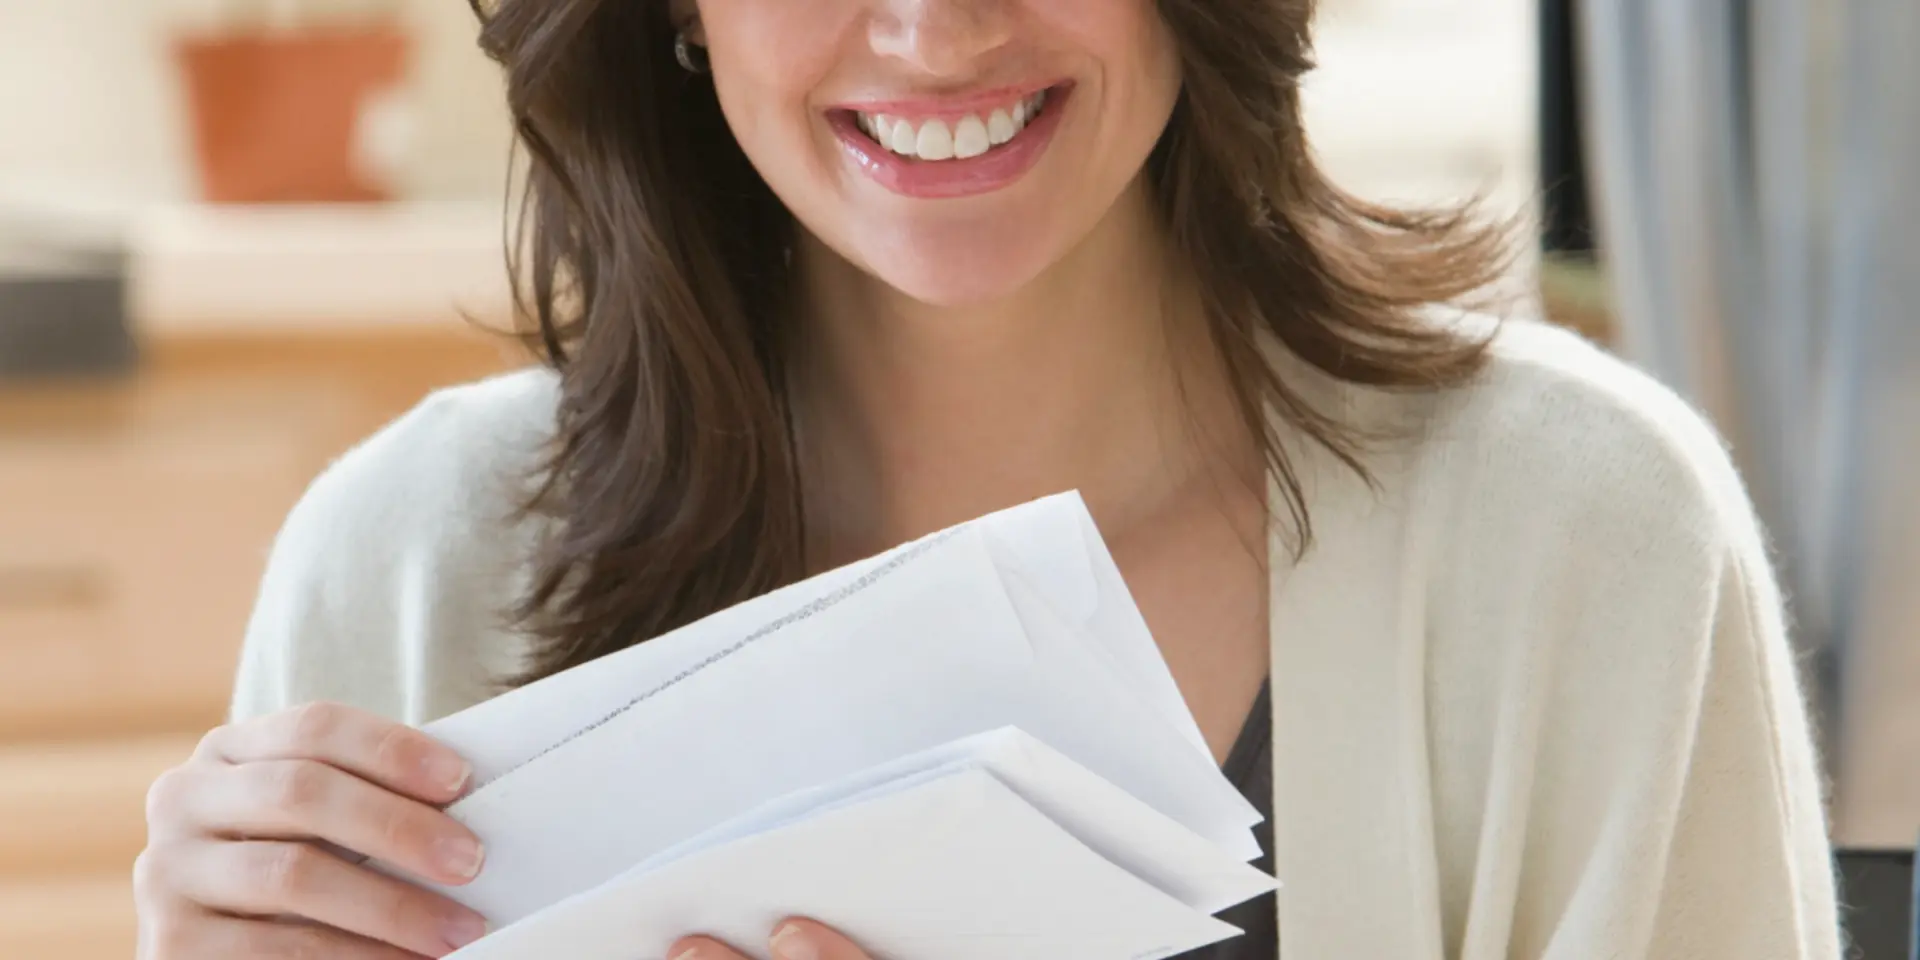 Woman smiling and holding a stack of white envelopes.